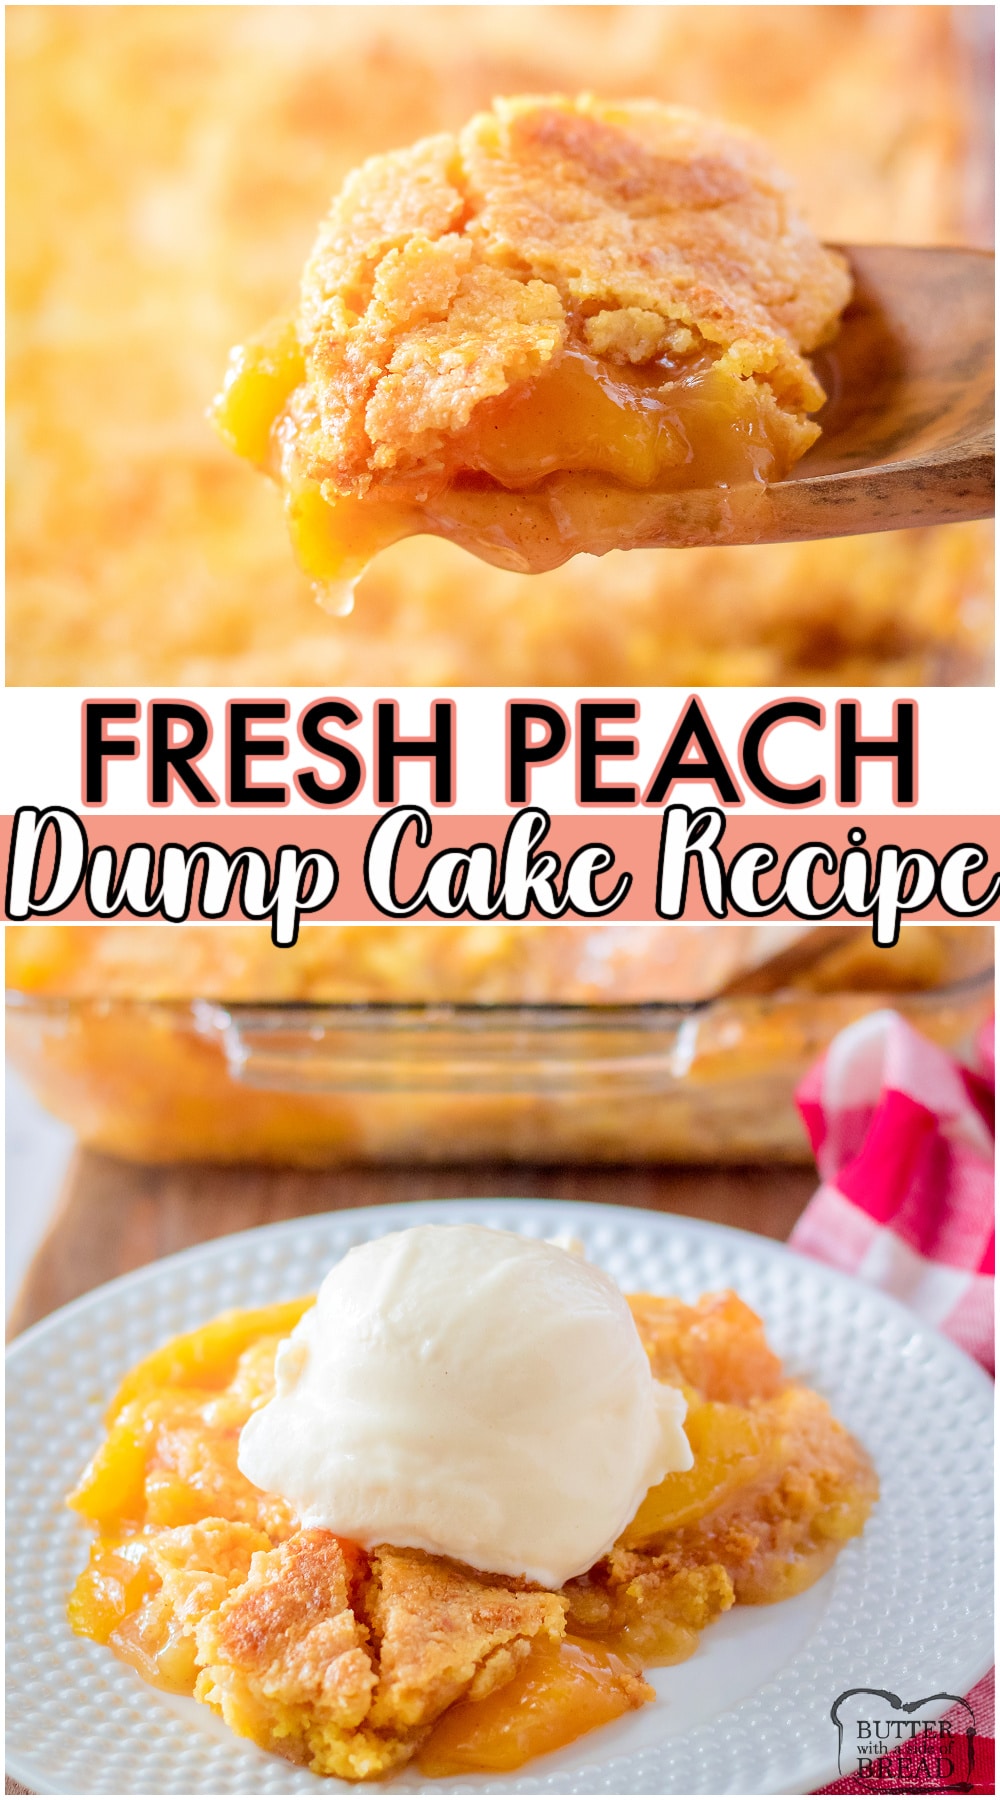 Fabulous Peach Dump Cake recipe made with spiced peaches, a cake mix and BUTTER for a super easy, delicious dessert. Just 4 ingredients & a few minutes of prep and you're on your way to this dreamy peach cobbler.  #peach #cobbler #dumpcake #peaches #baking #easyrecipe from BUTTER WITH A SIDE OF BREAD